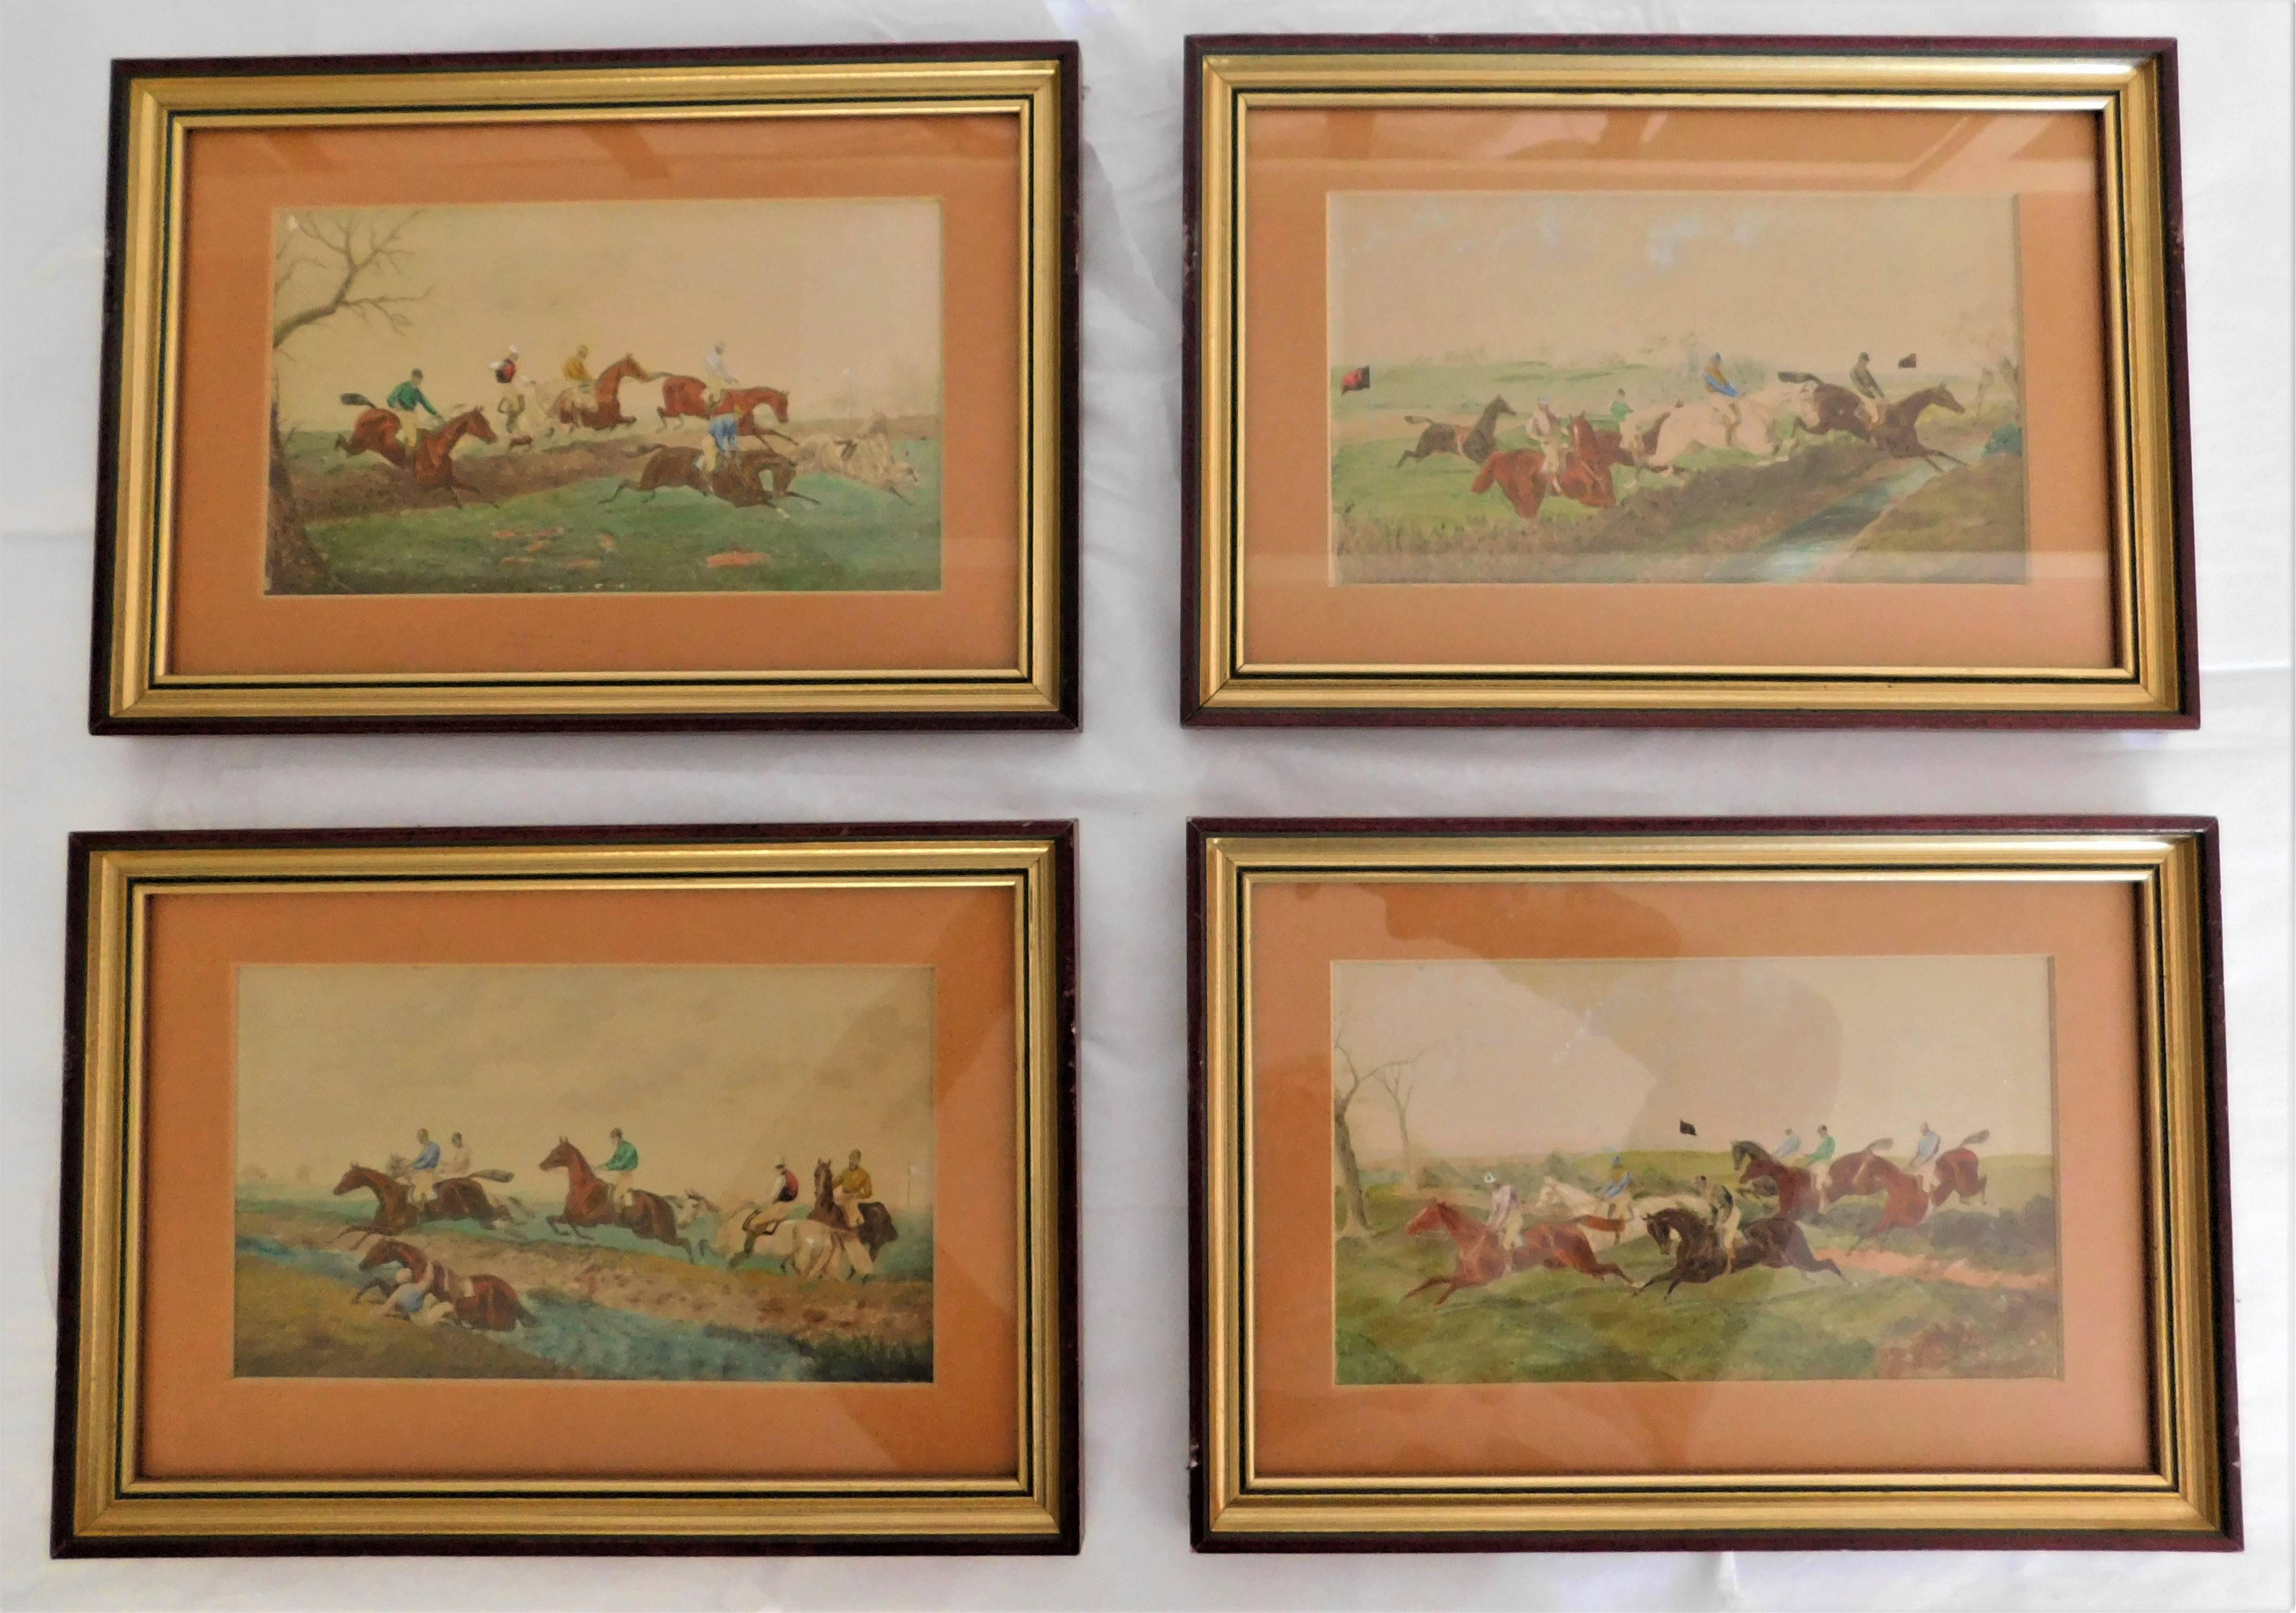 These 19th century series of four original watercolor English steeple chase paintings can be purchased individually or as a group. All four have nice frames with glass.